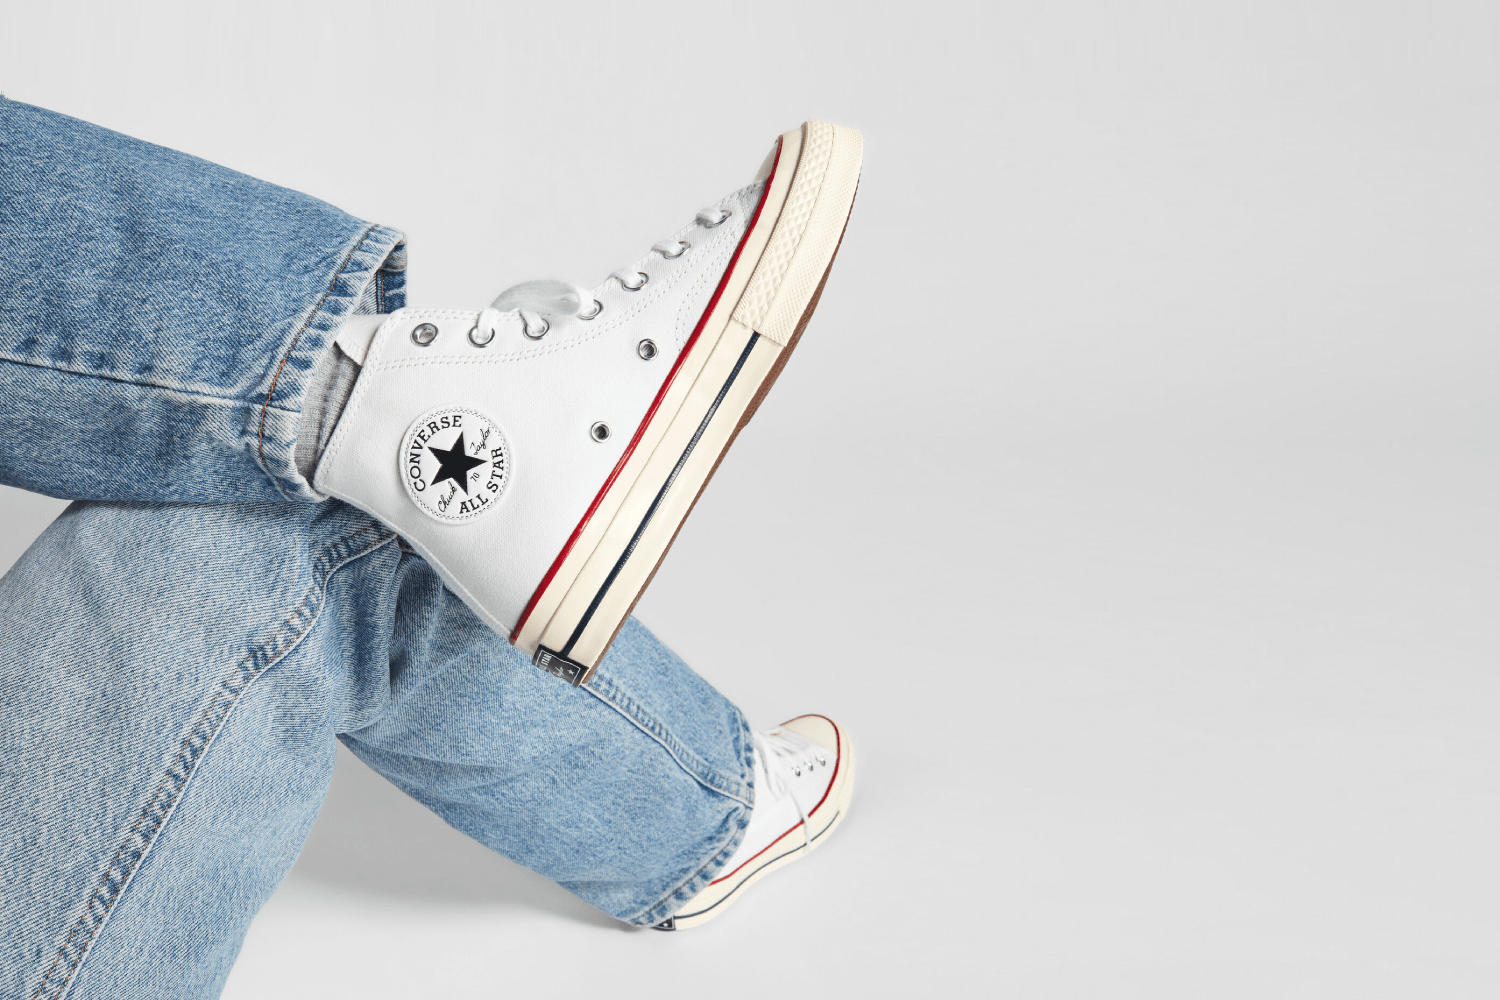 Save 30% during the Converse Back to School Flash Sale